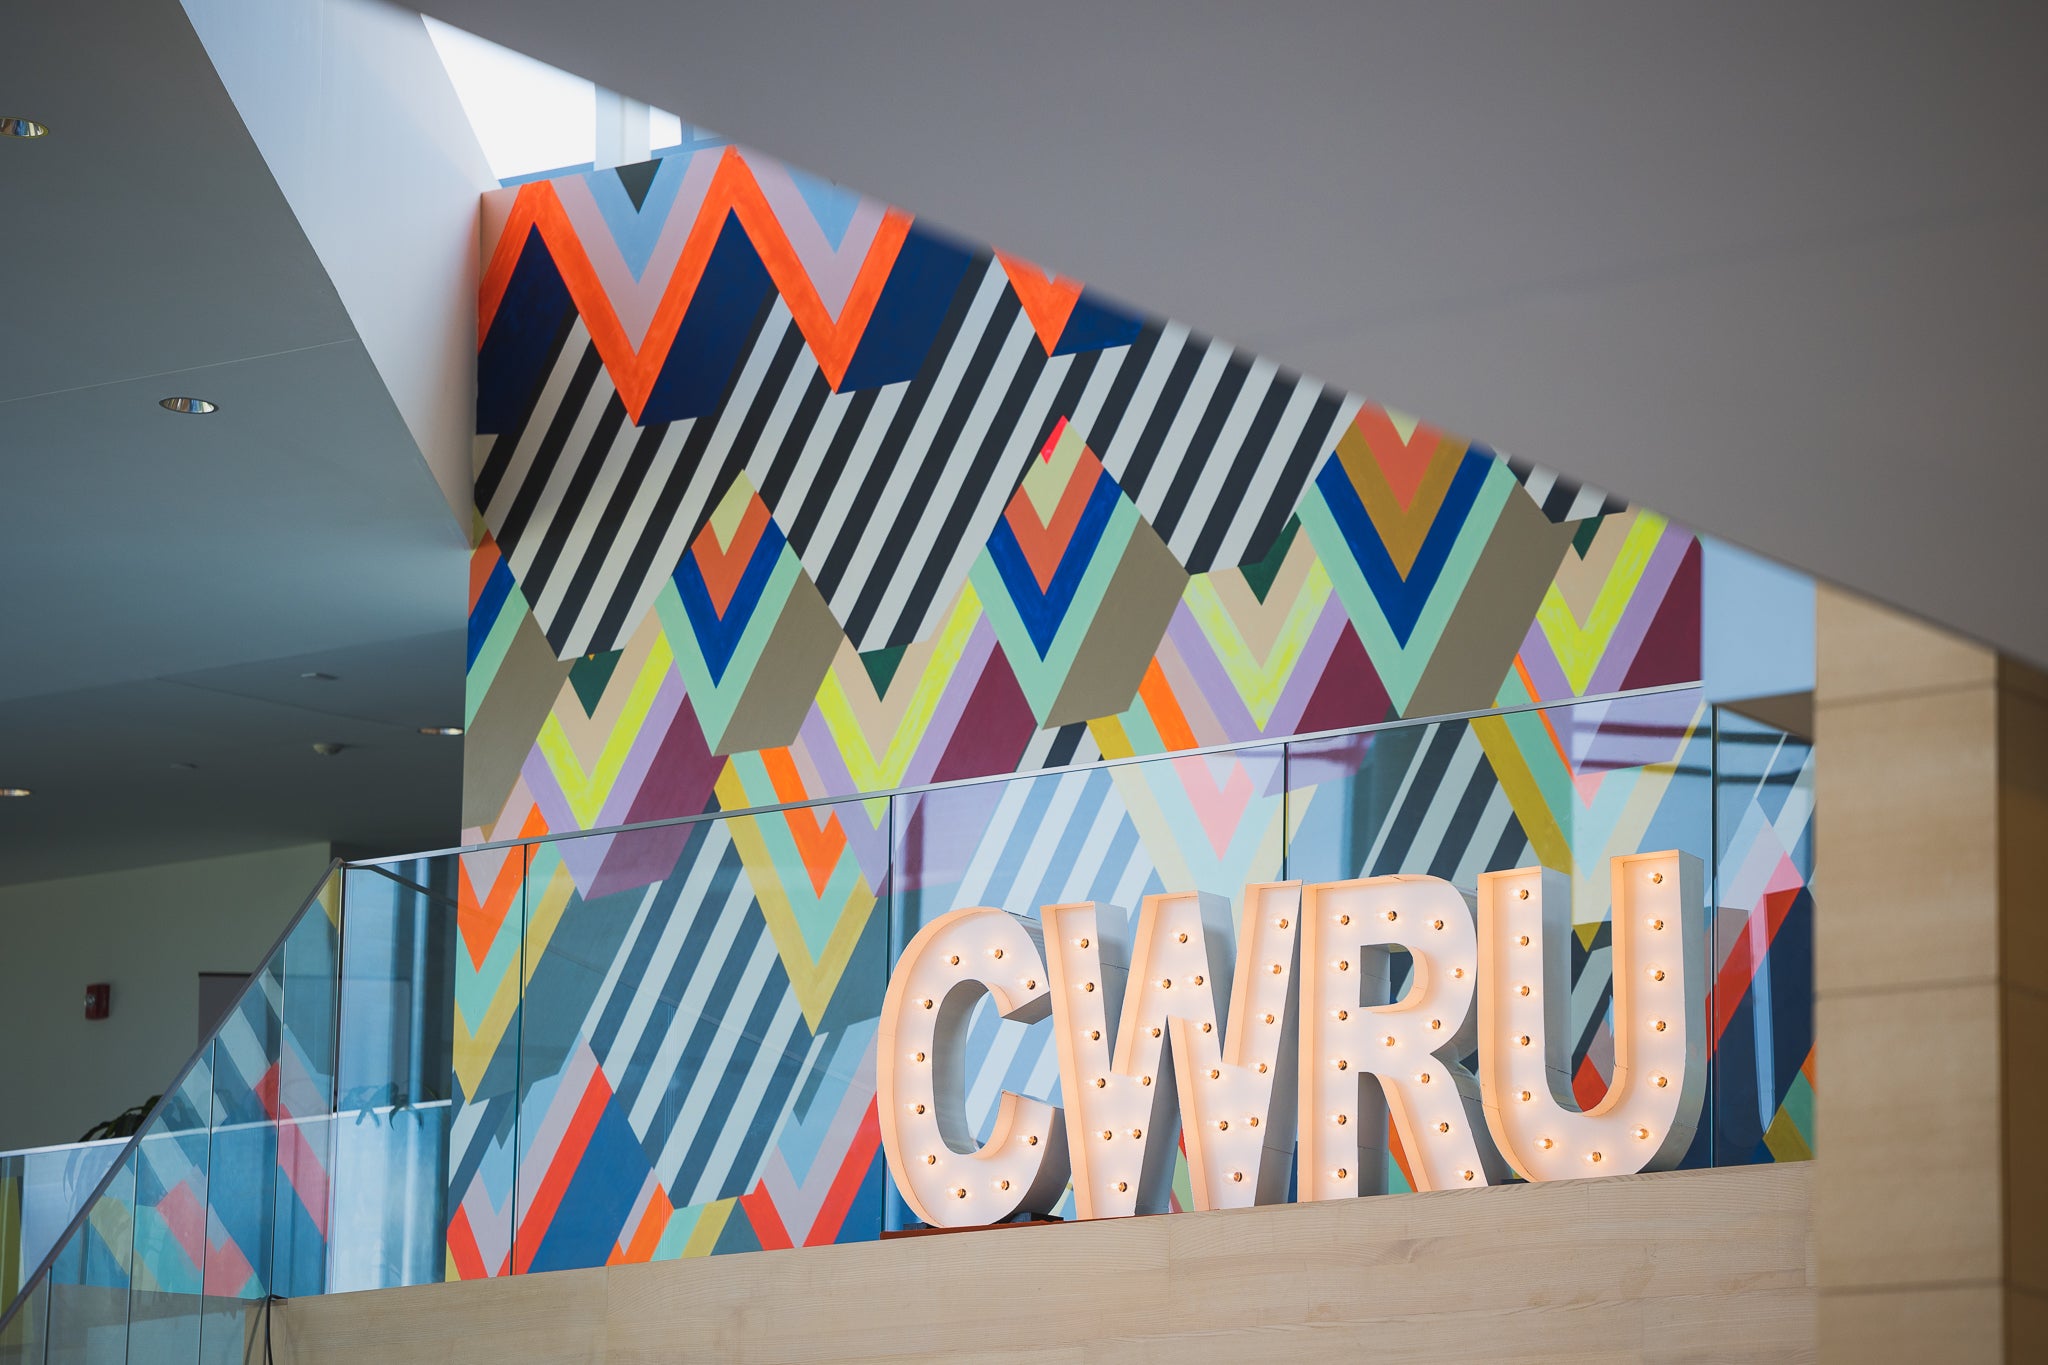 The letters CWRU are spelled in large light-up letters at the top of the stairs in Tinkham Veale University Center, with a colorful patterned background